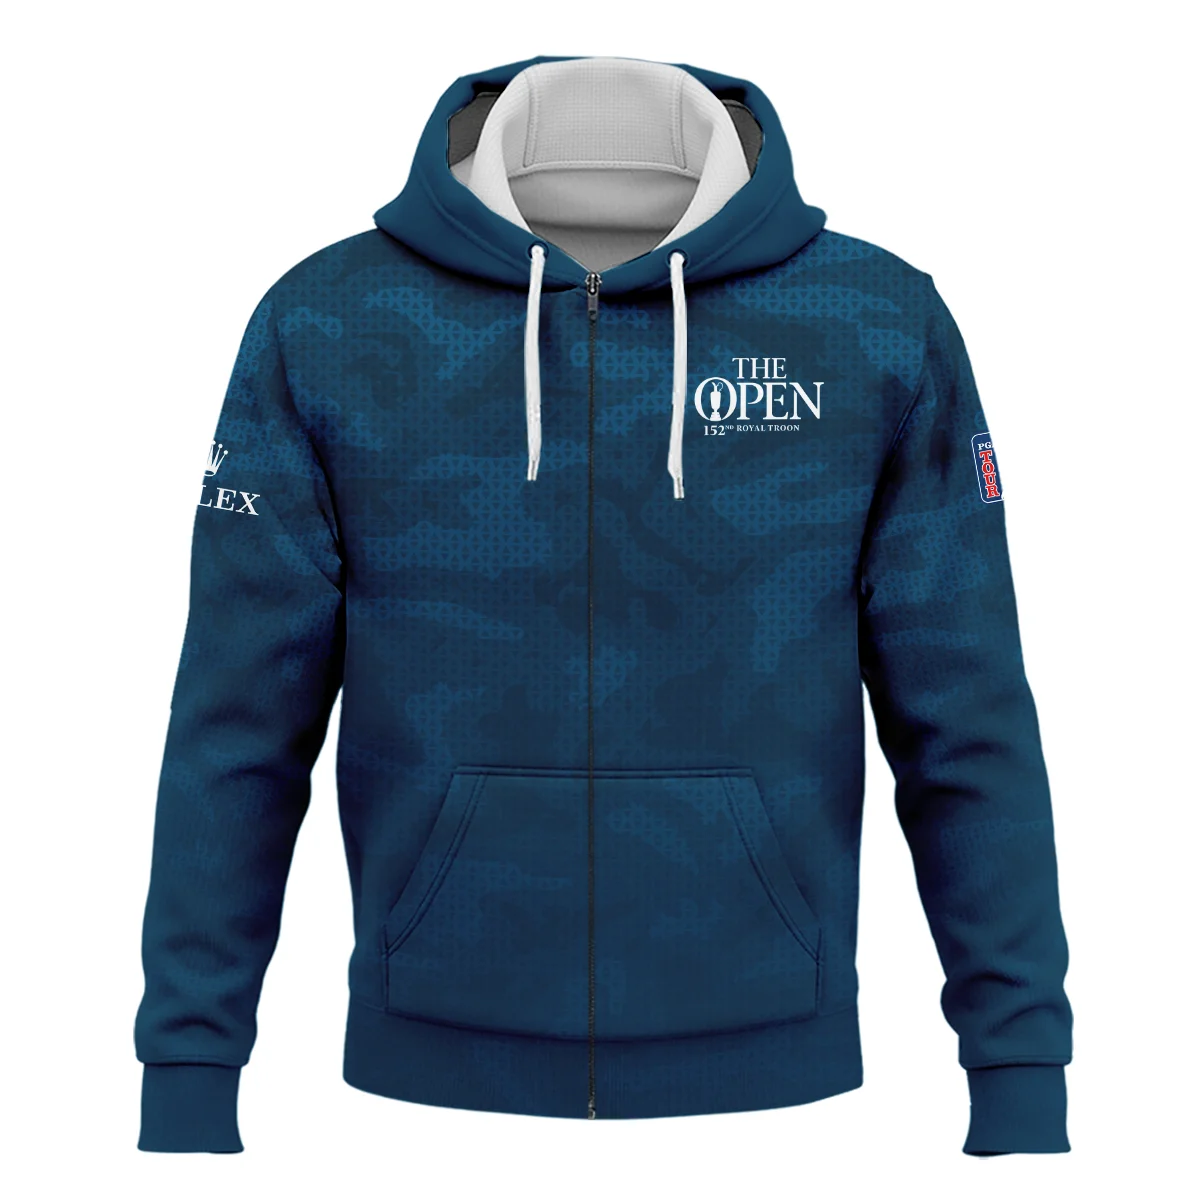 Rolex 152nd Open Championship Dark Blue Abstract Background Hoodie Shirt All Over Prints HOTOP260624A02ROXHD